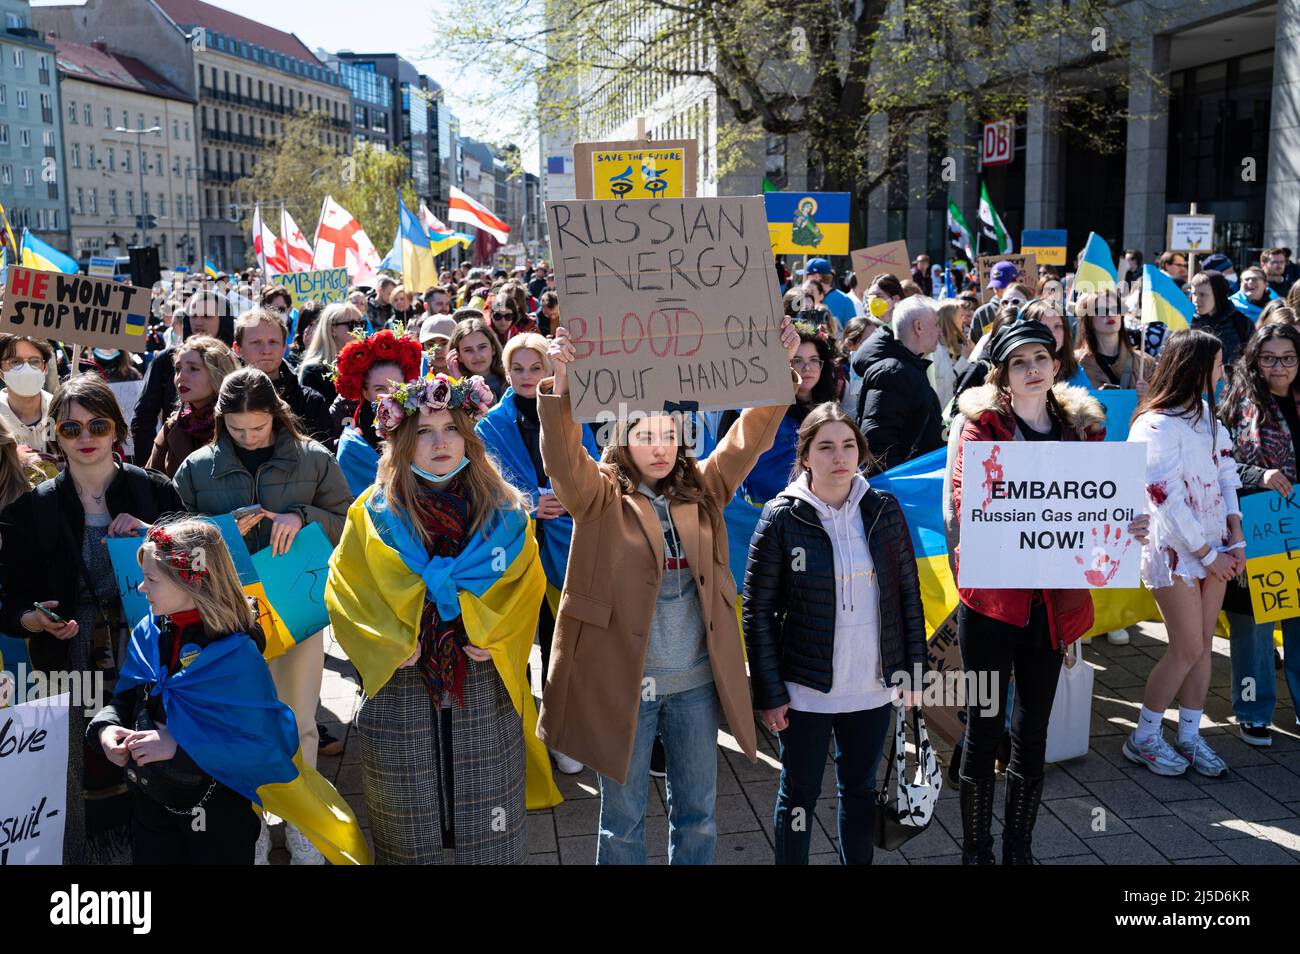 '04/16/2022, Berlin, Germany, Europe - Demonstrators protest at the final rally on Elisabeth-Schwarzhaupt-Platz during a demonstration under the slogan ''March for true Peace in Ukraine'' as part of the alternative Easter March, which is directed against Russian military aggression in the two wars in Ukraine and Syria. The demonstrators demand further sanctions against Russia and more support from the West in the form of defensive weapons, as well as the immediate boycott of energy imports from Russia such as oil and gas. [automated translation]' Stock Photo